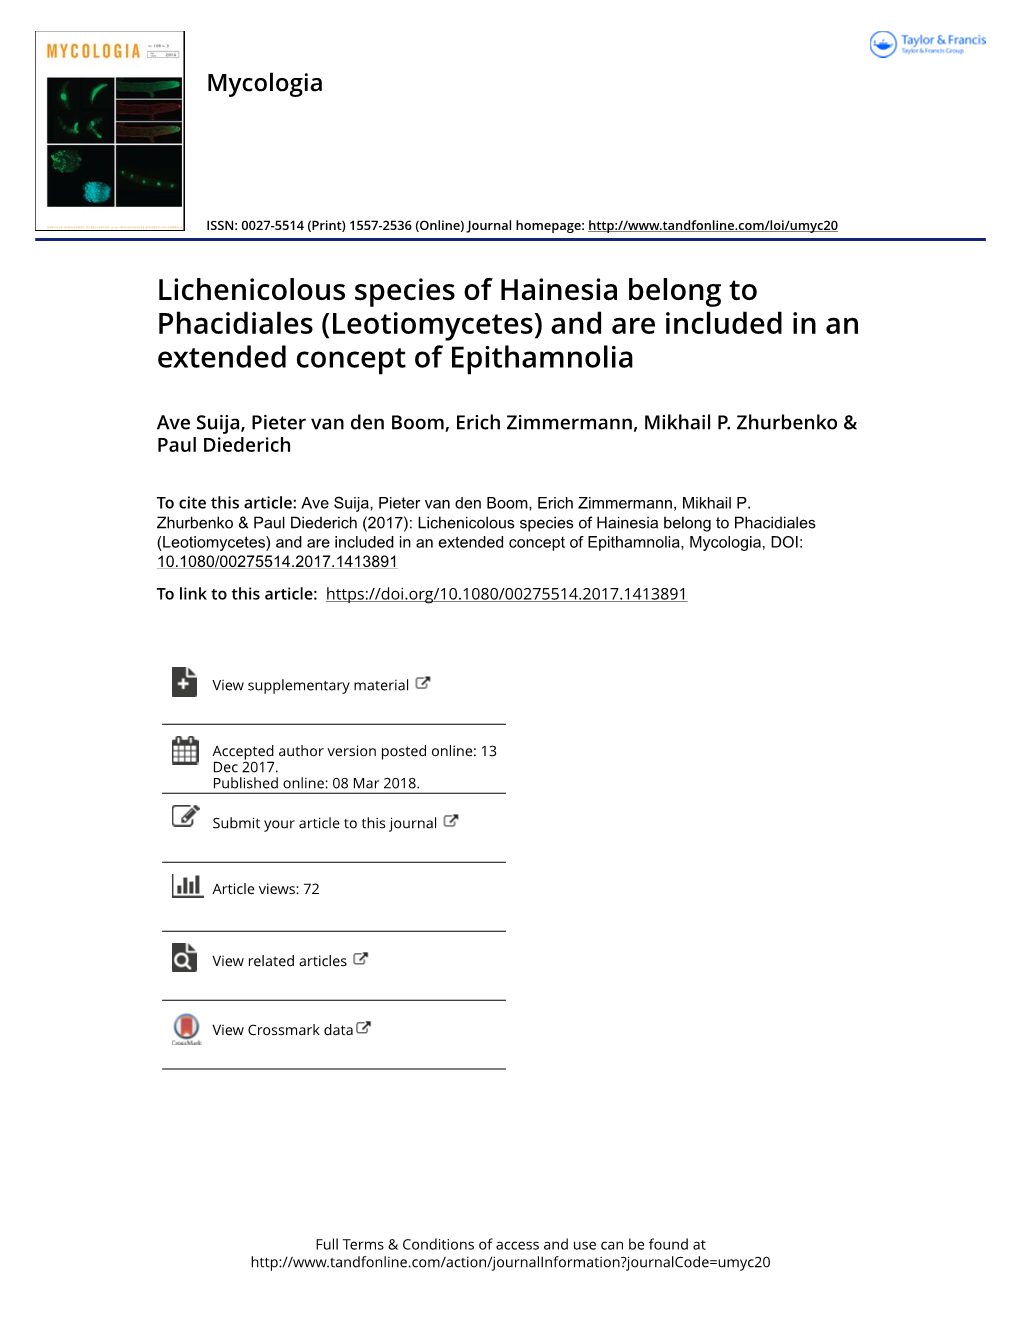 Lichenicolous Species of Hainesia Belong to Phacidiales (Leotiomycetes) and Are Included in an Extended Concept of Epithamnolia